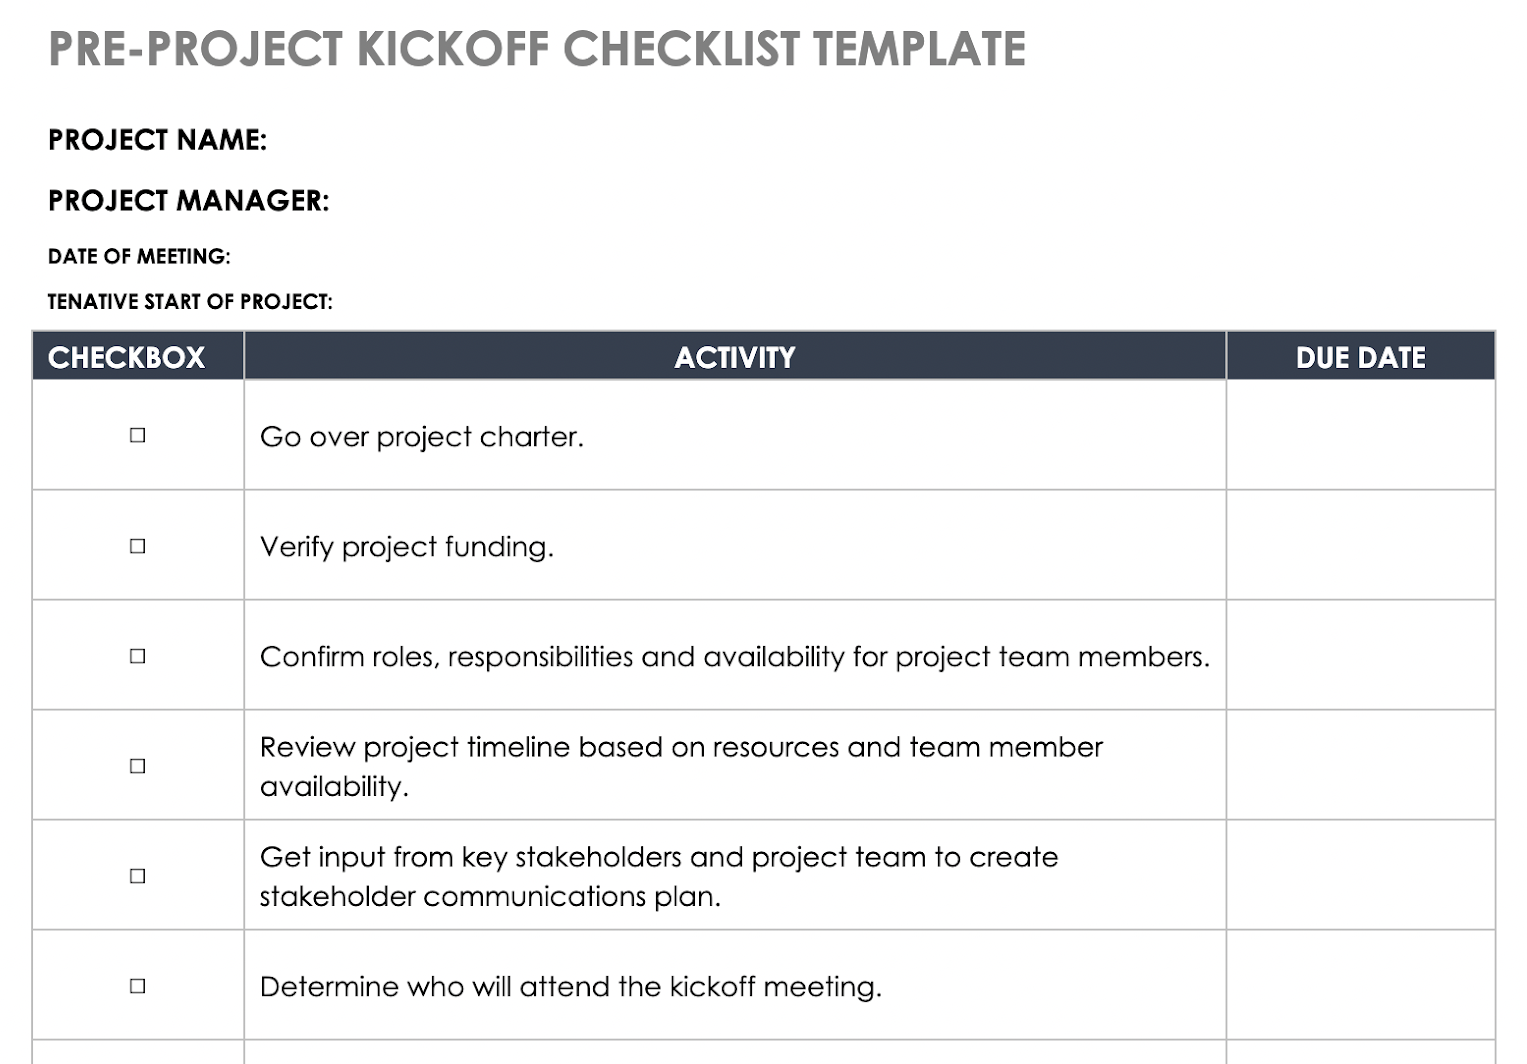 Pre-Project Kickoff Checklist Template for Google Docs